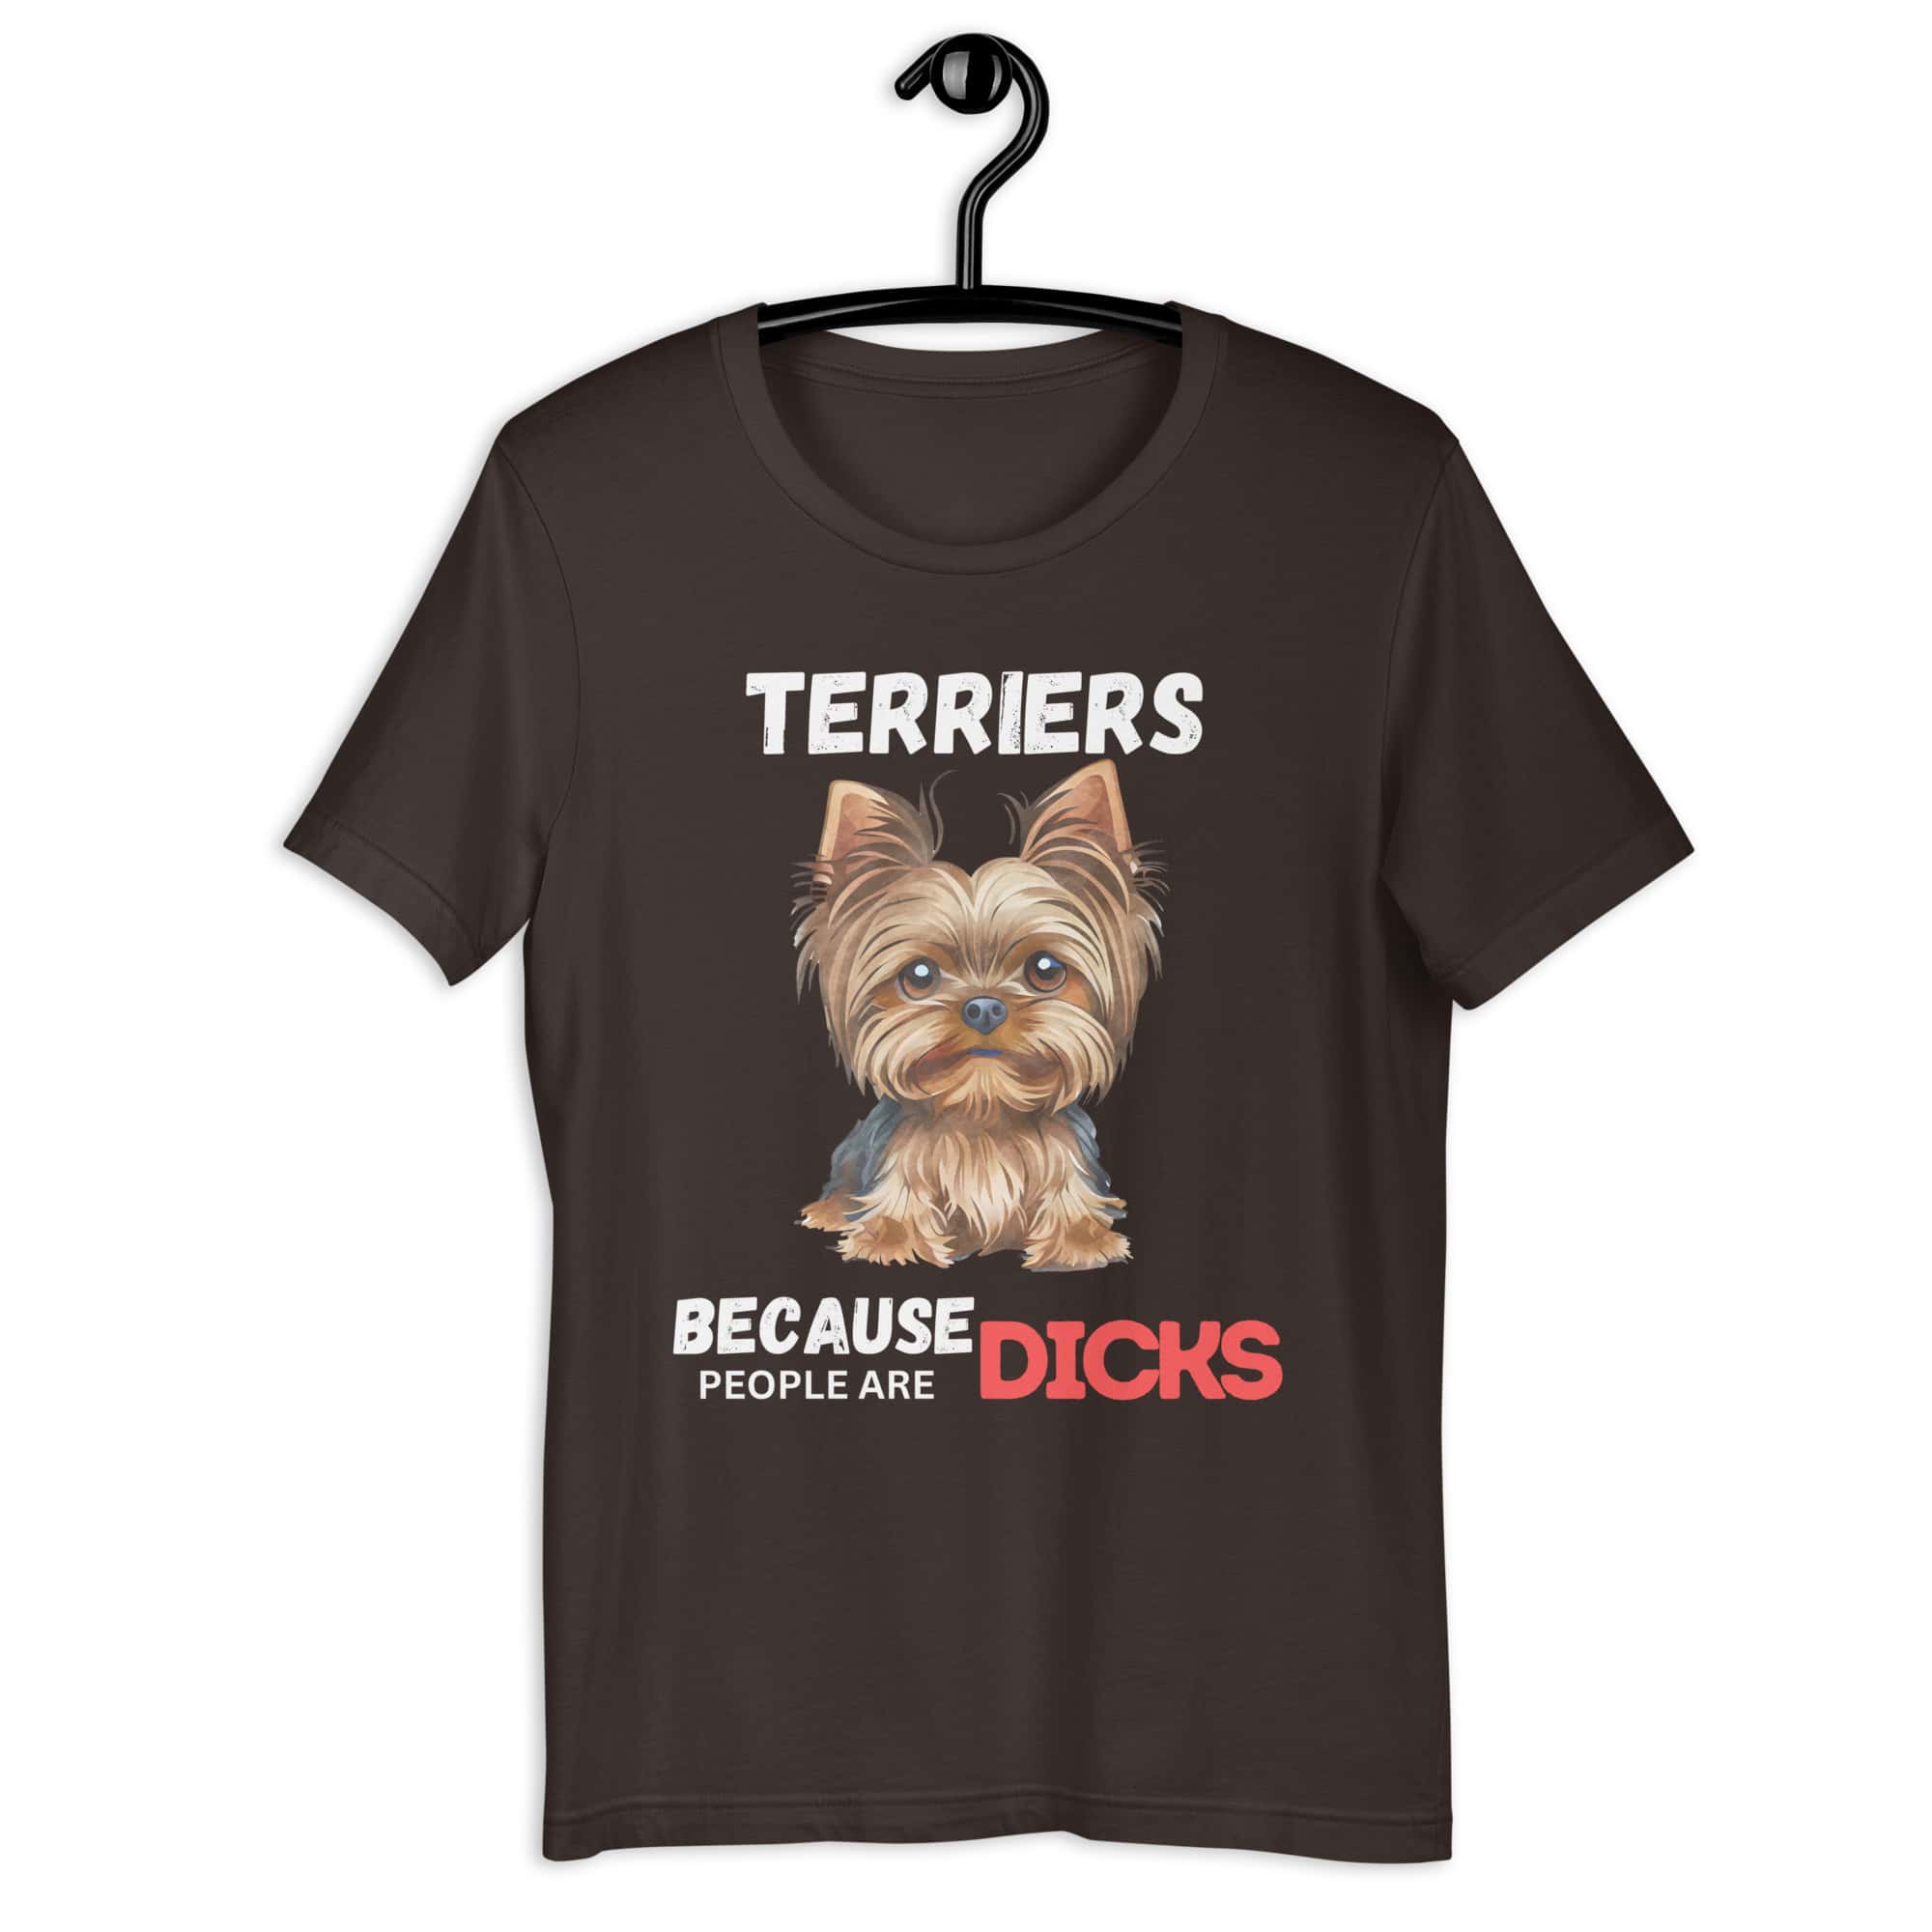 Yorkshire Terriers Because People Are Dicks Unisex T-Shirt - brown